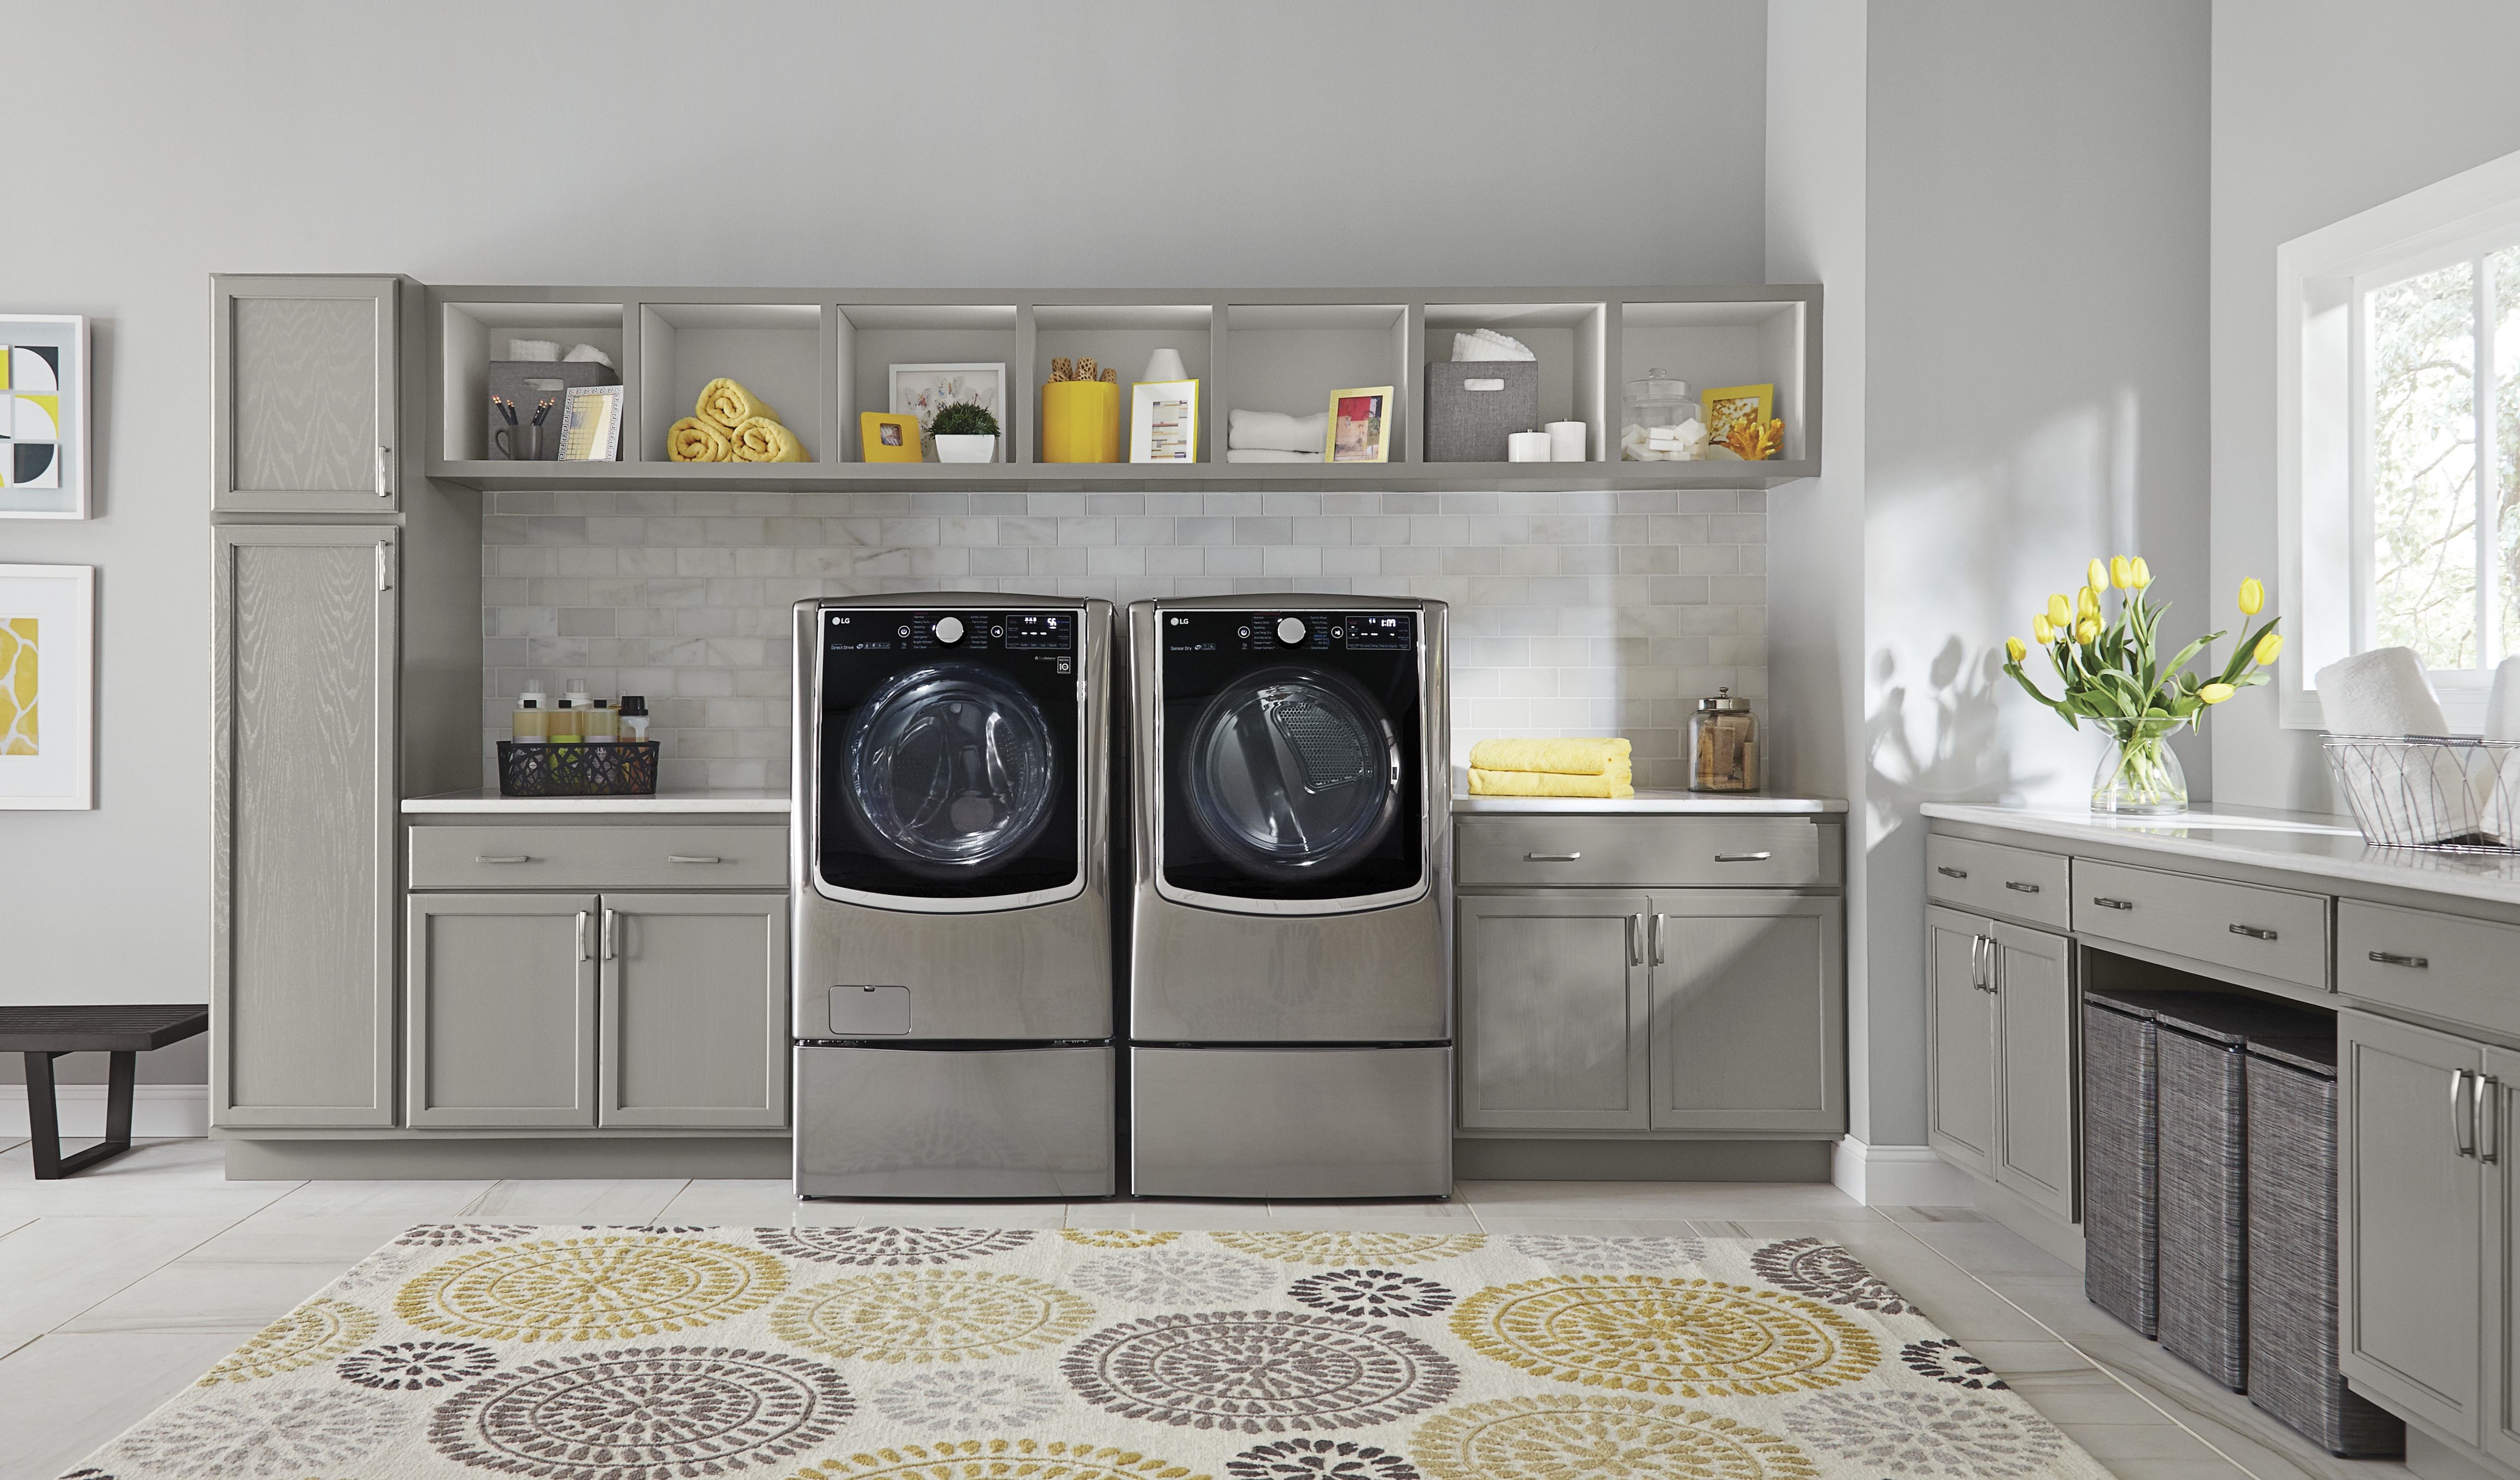 energy-star-dryers-and-washers-save-more-than-money-a-magical-mess